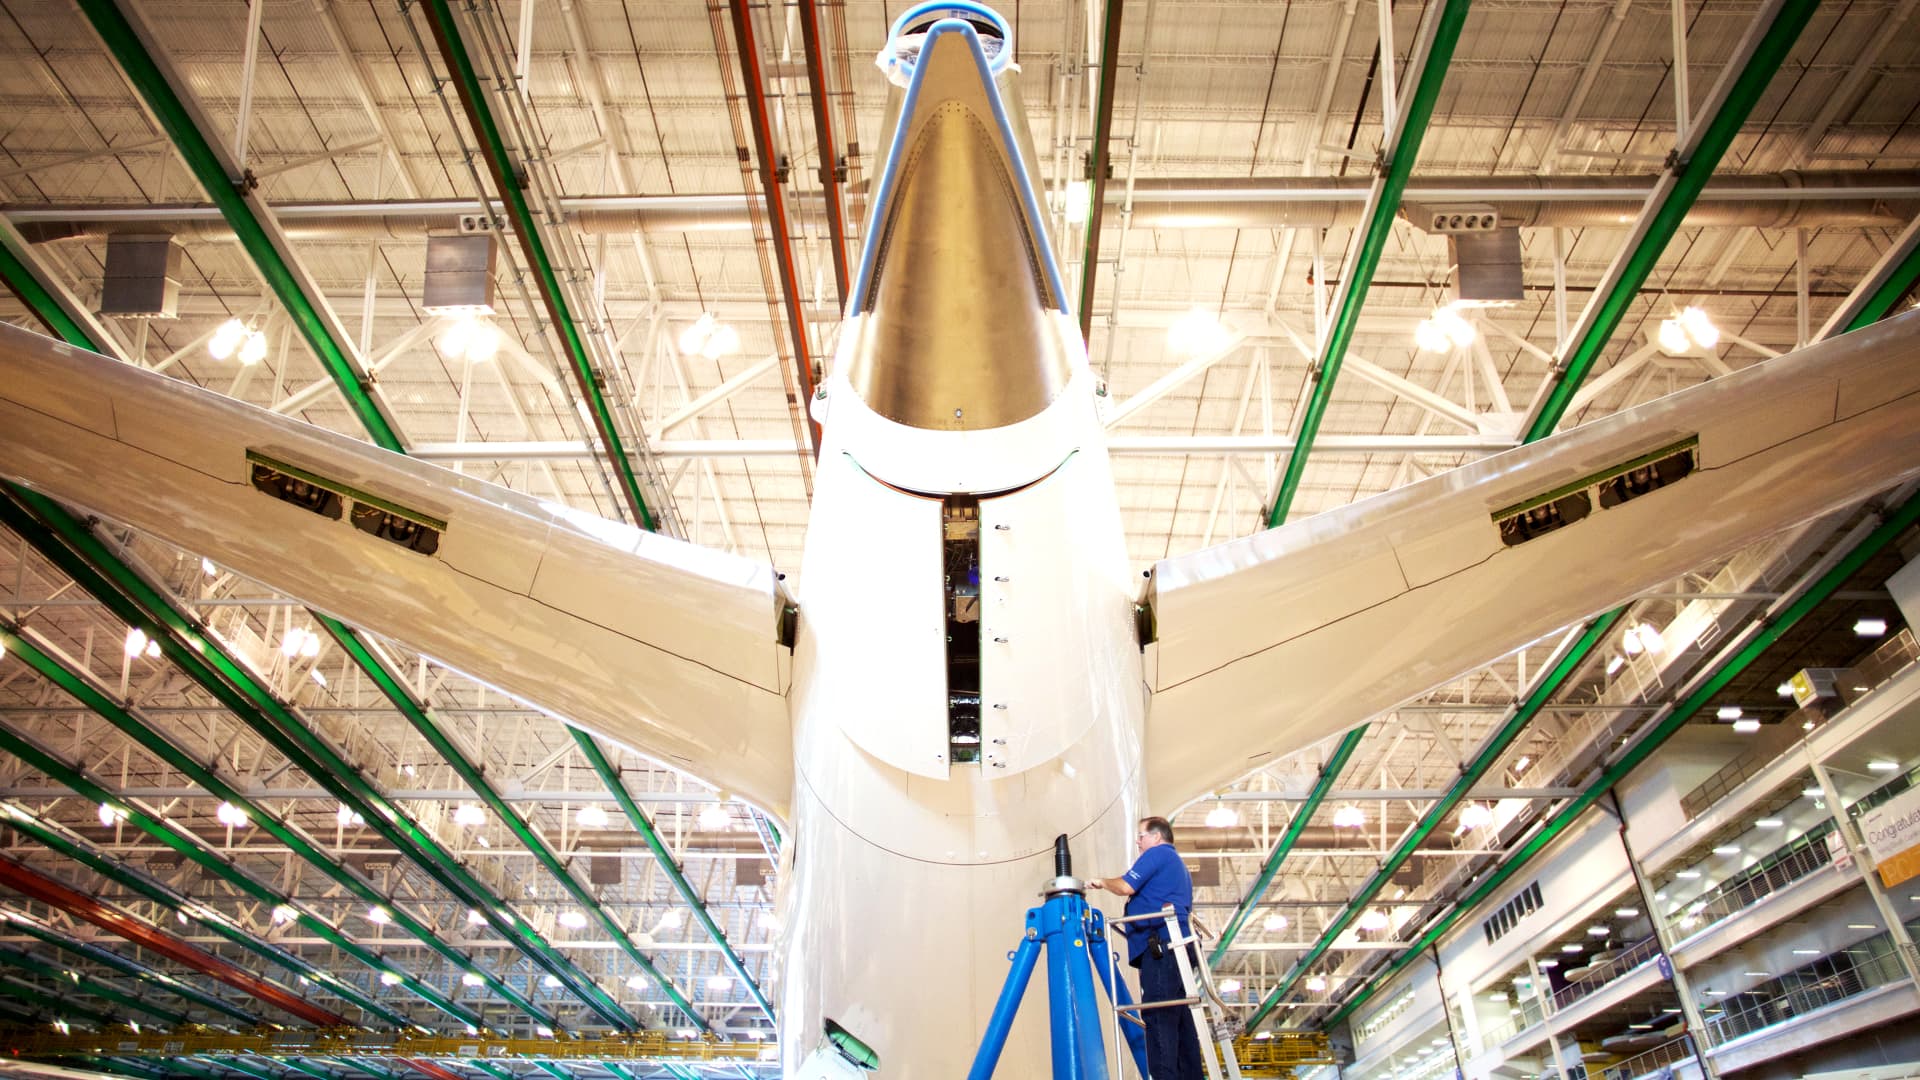 An employee works on the tail of a Boeing Co. Dreamliner 787 plane on the production line at the company's final assembly facility in North Charleston, South Carolina.